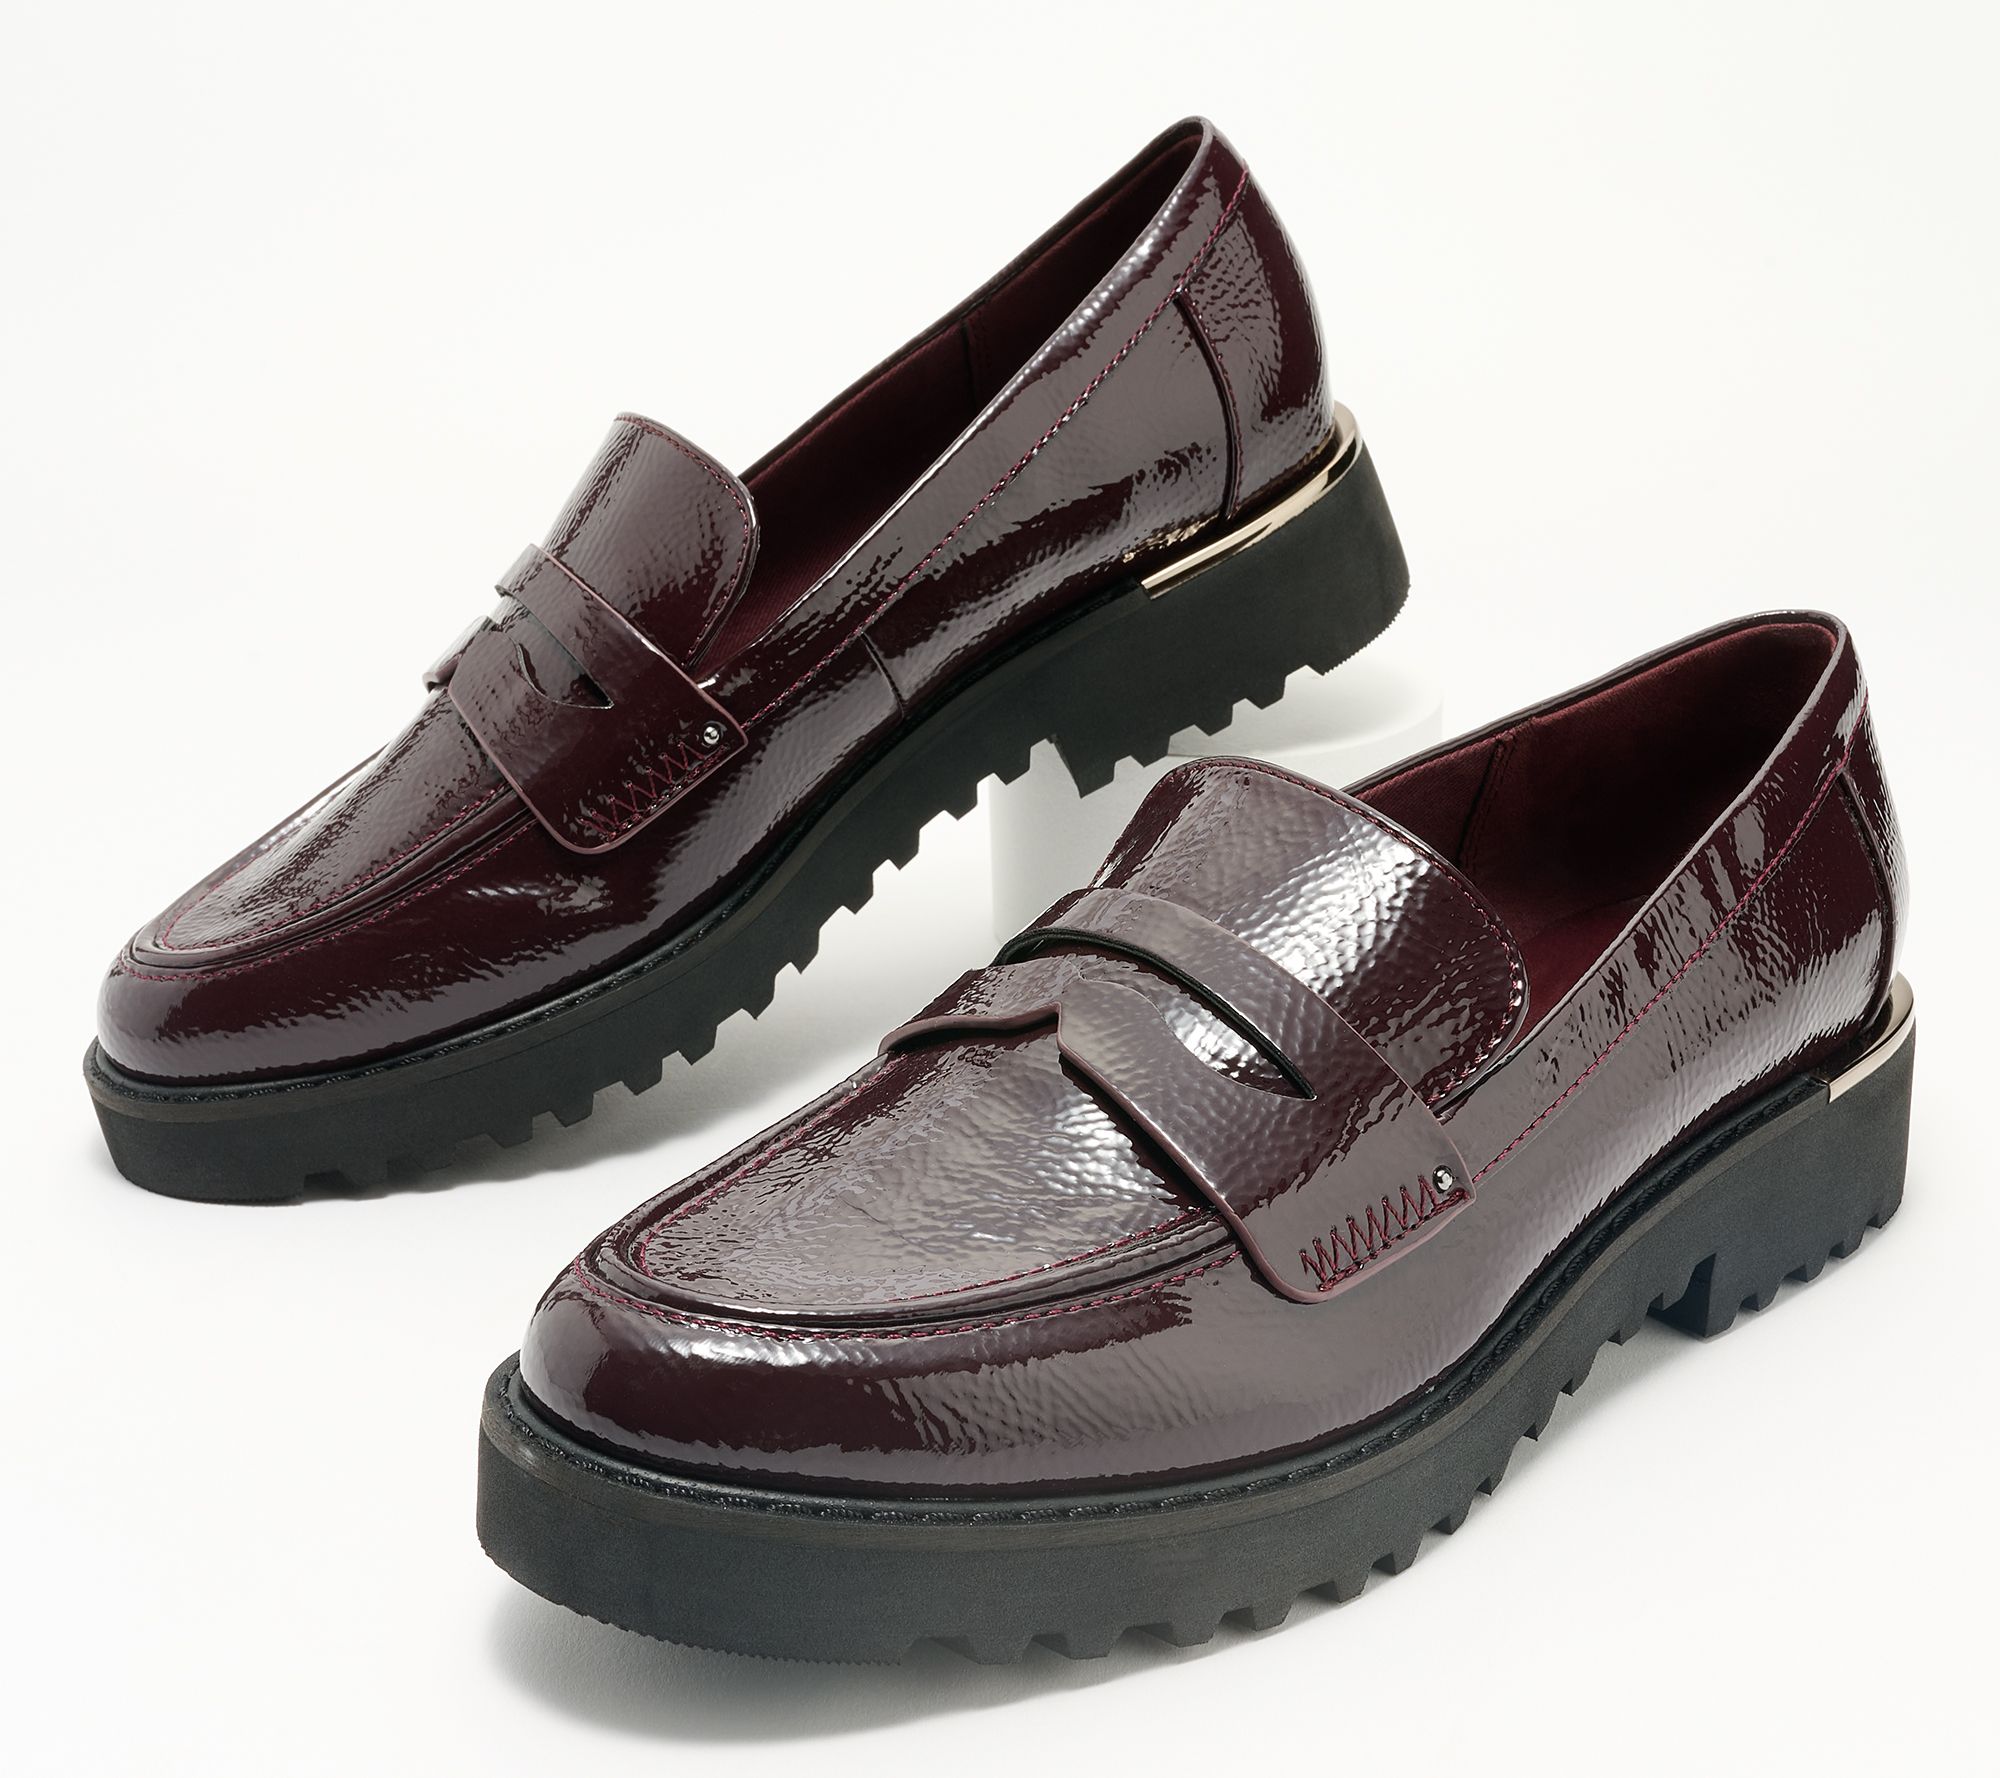 The Penny Loafer and how best to style this classic shoe, Thomas Bird